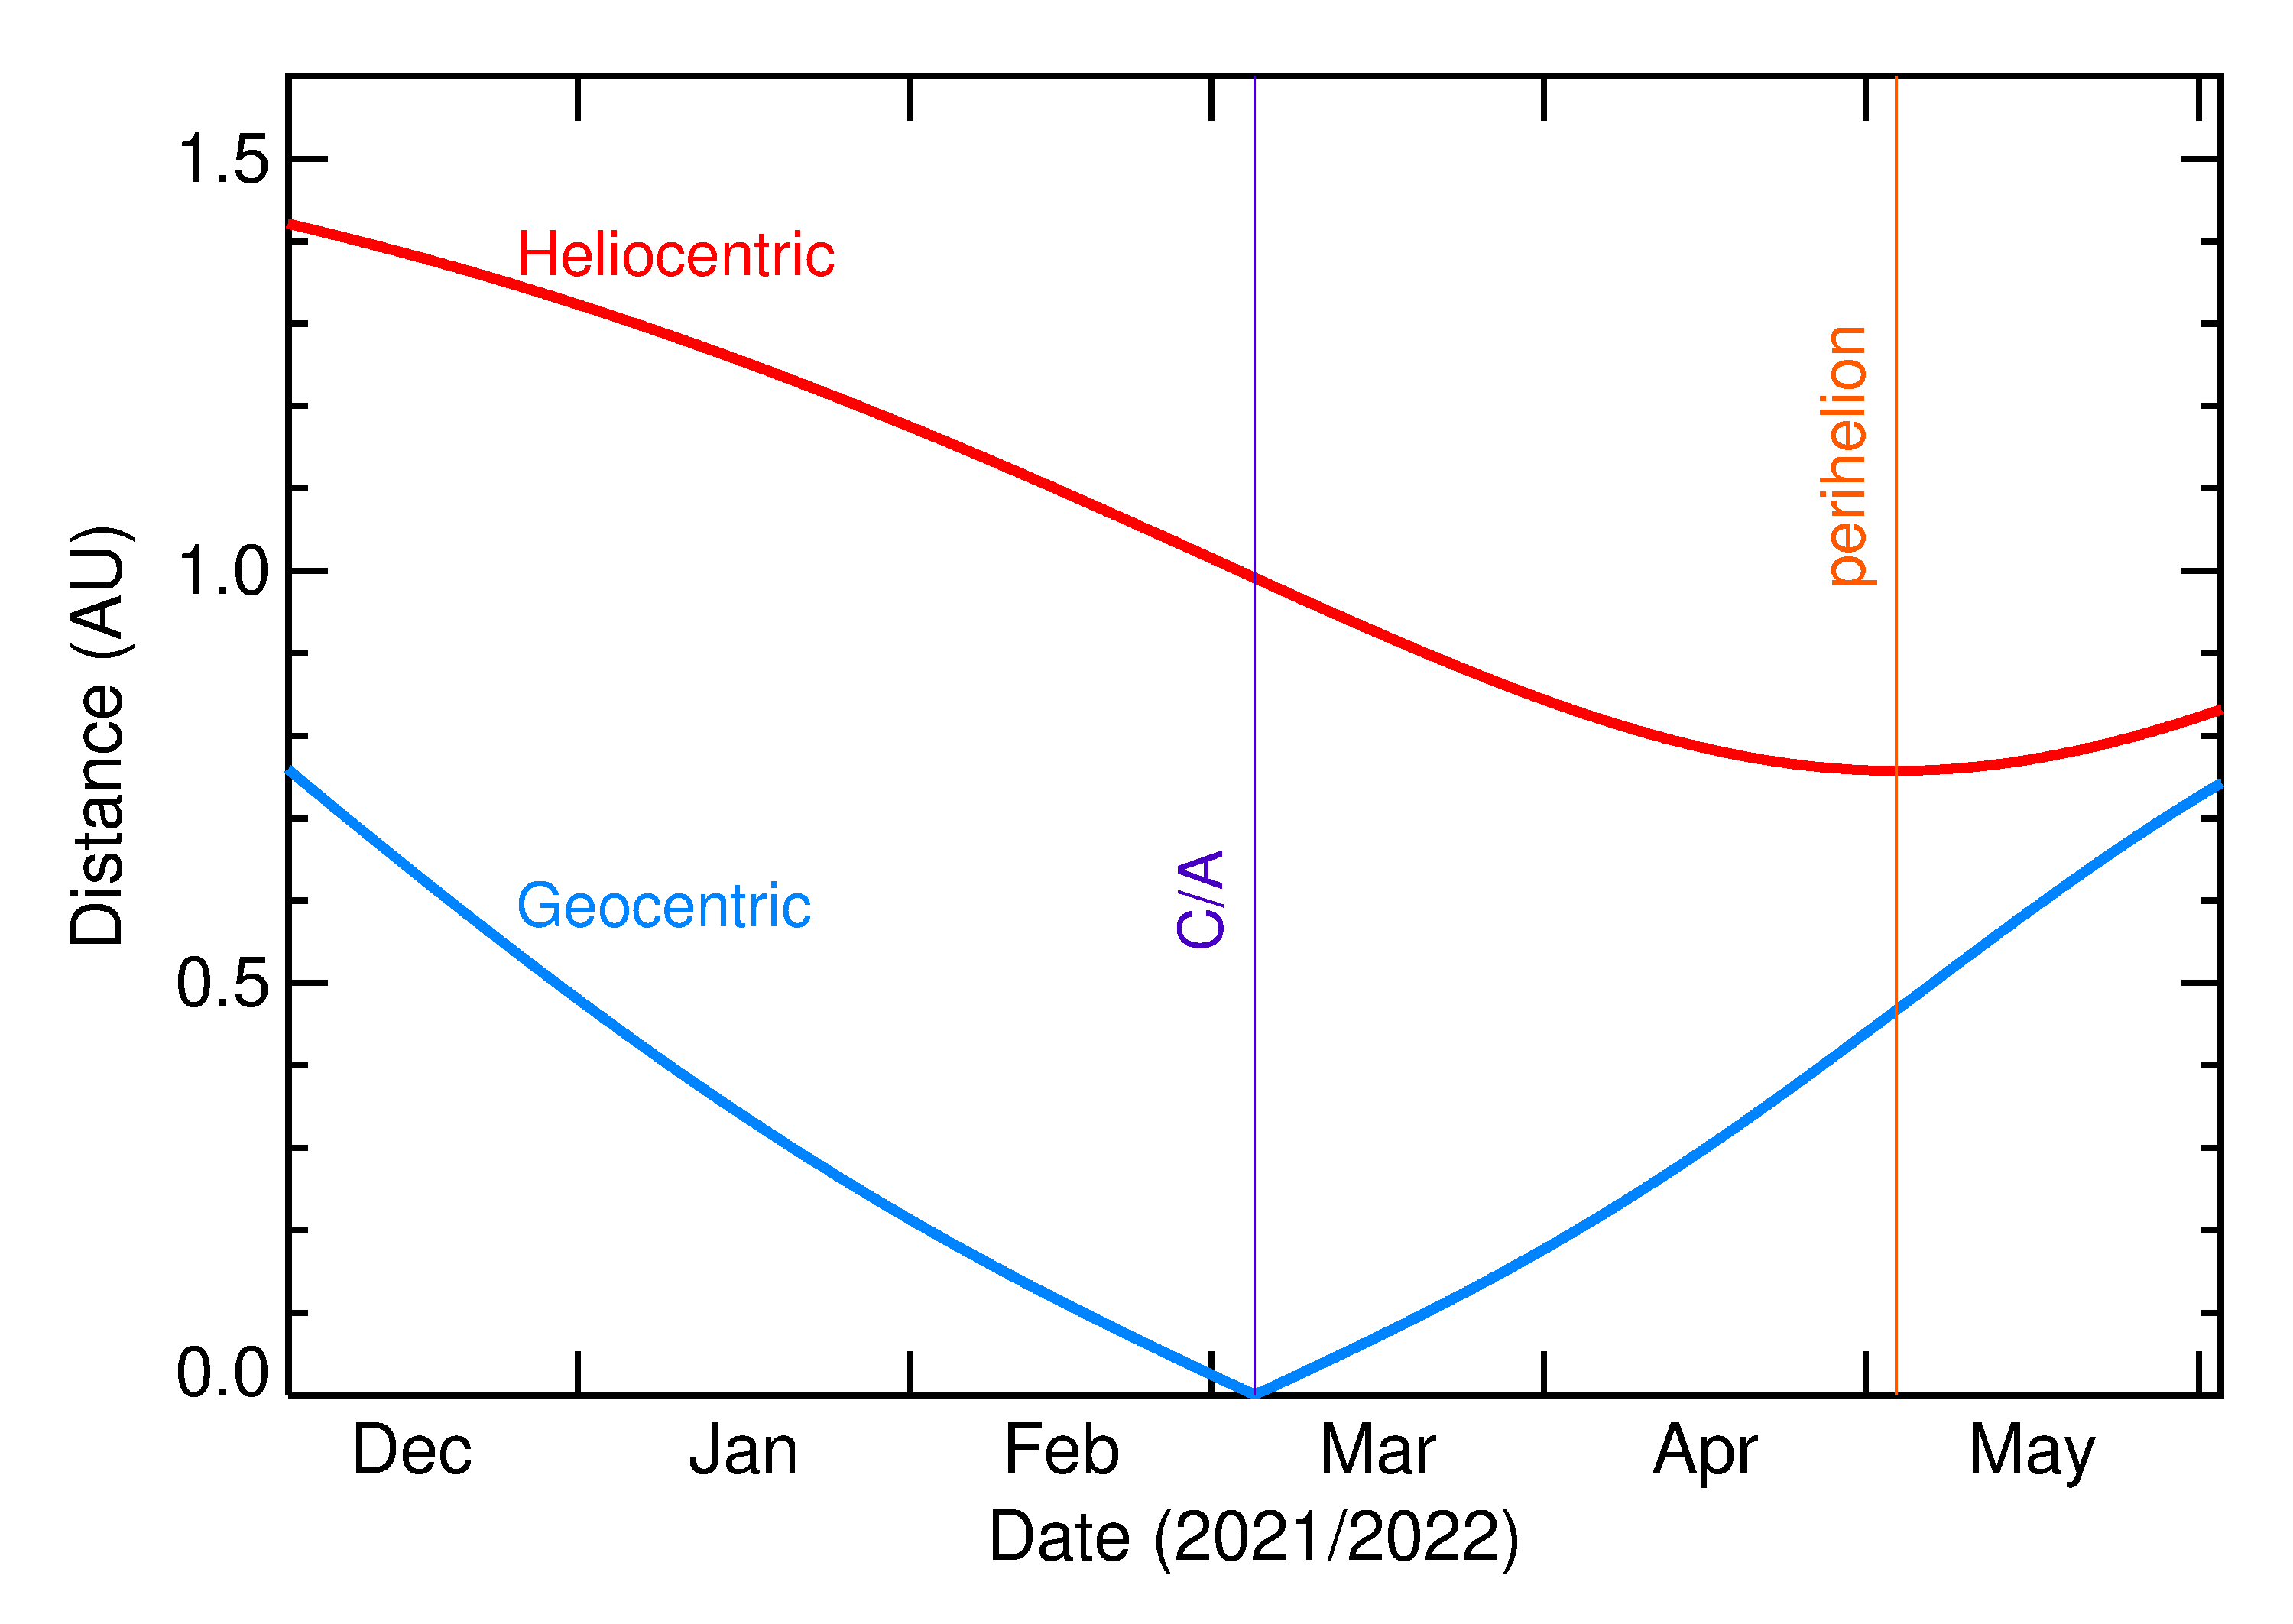 Heliocentric and Geocentric Distances of 2022 EF1 in the months around closest approach